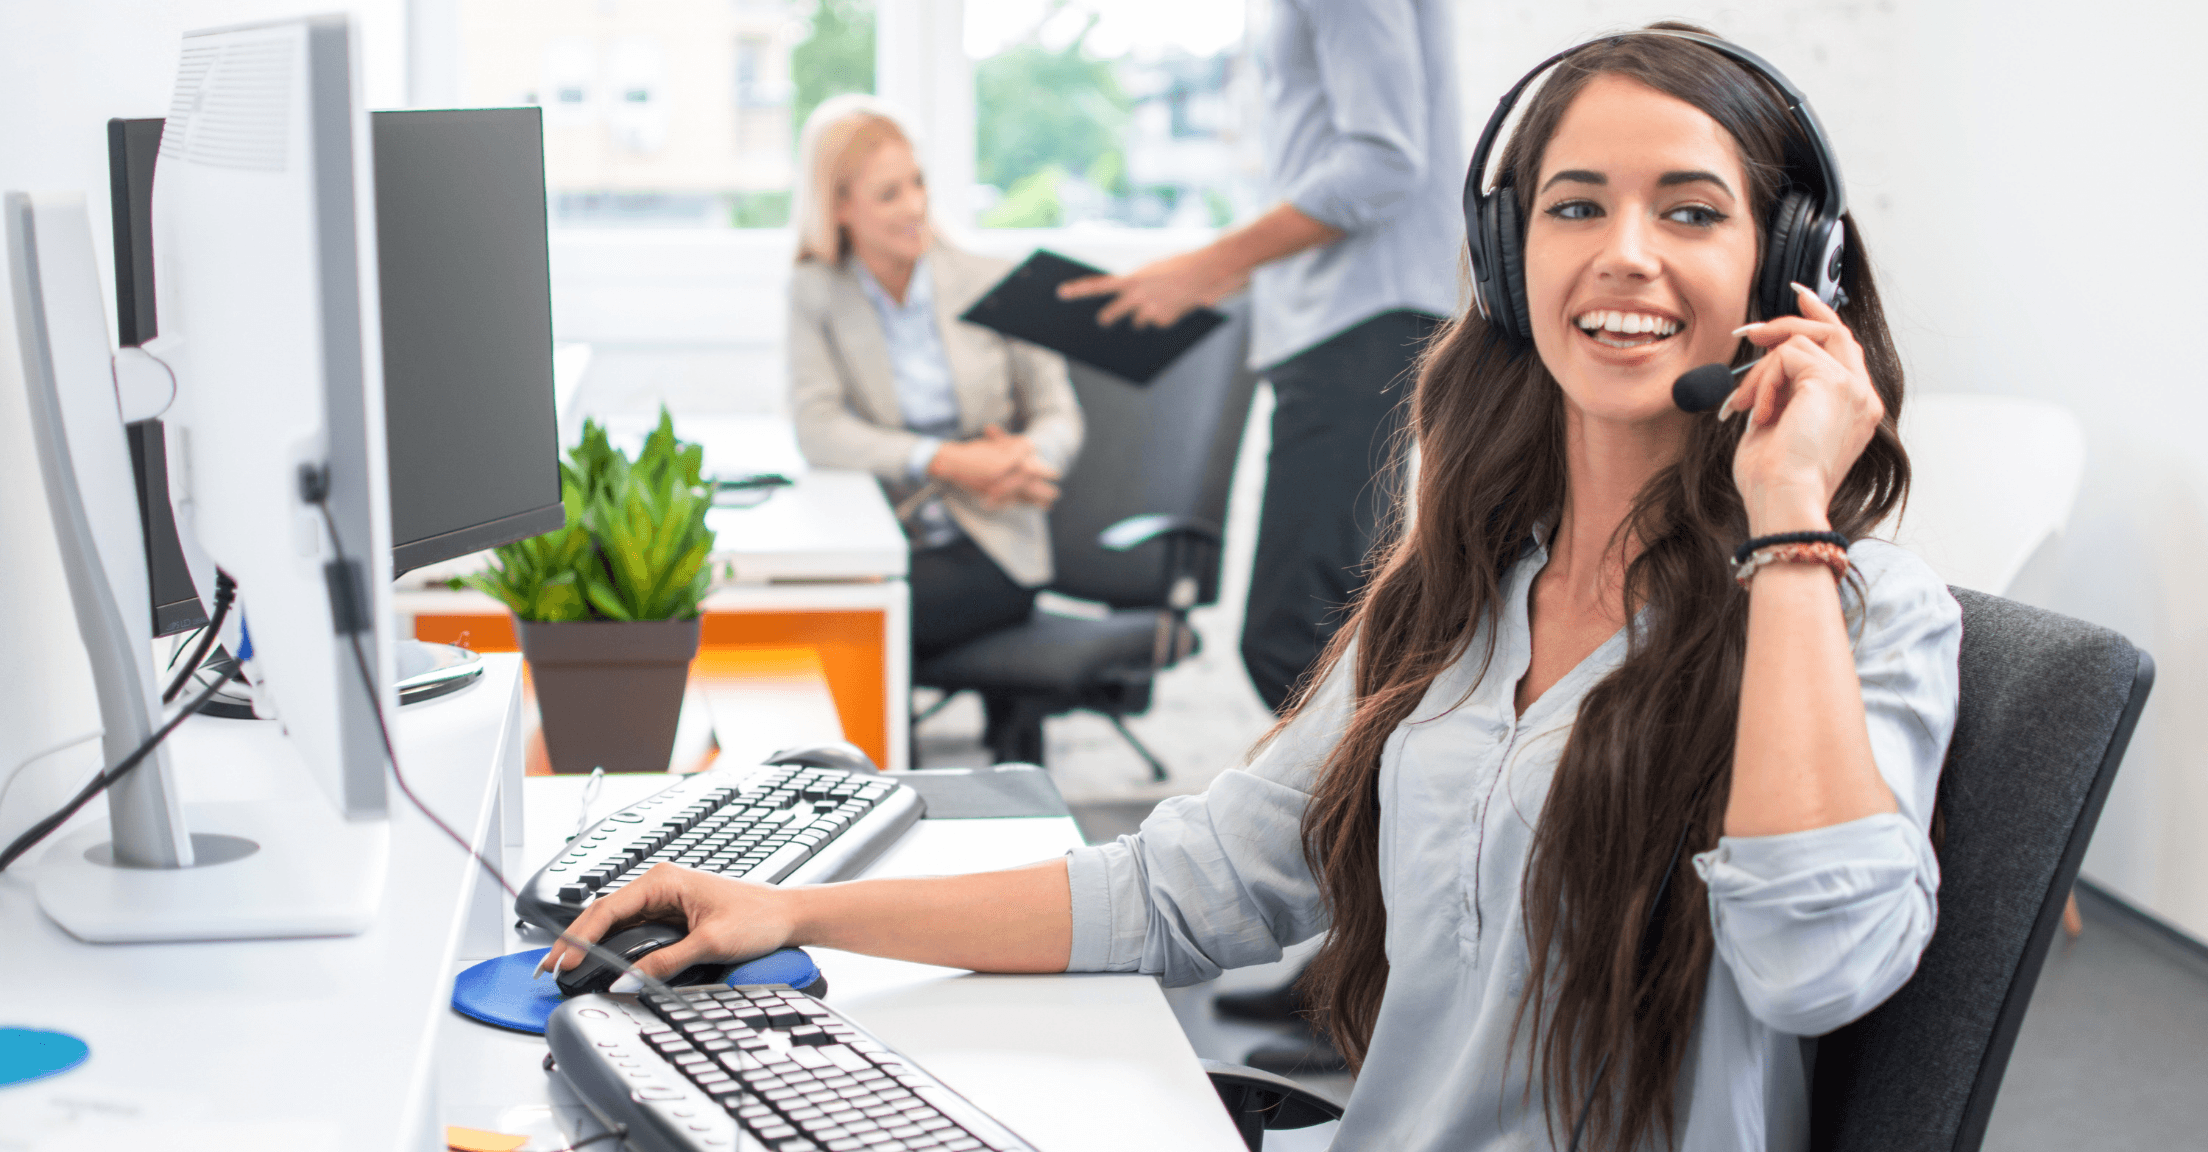 Woman working in customer support speaking on the phone with an advisor